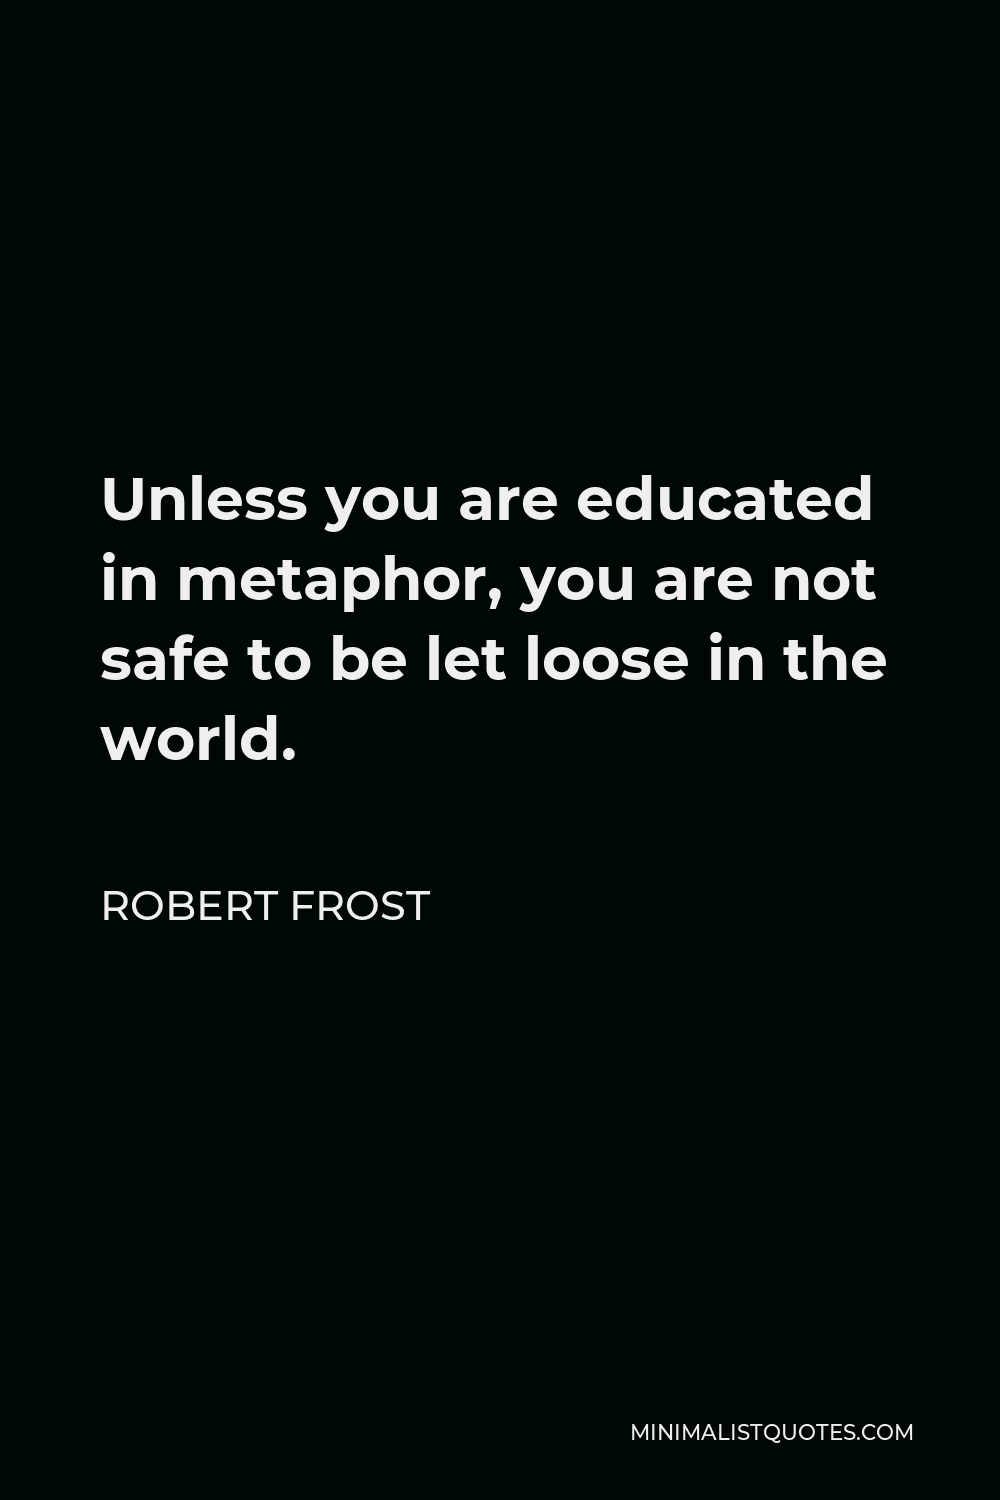 Robert Frost Quote Unless You Are Educated In Metaphor You Are Not Safe To Be Let Loose In The World